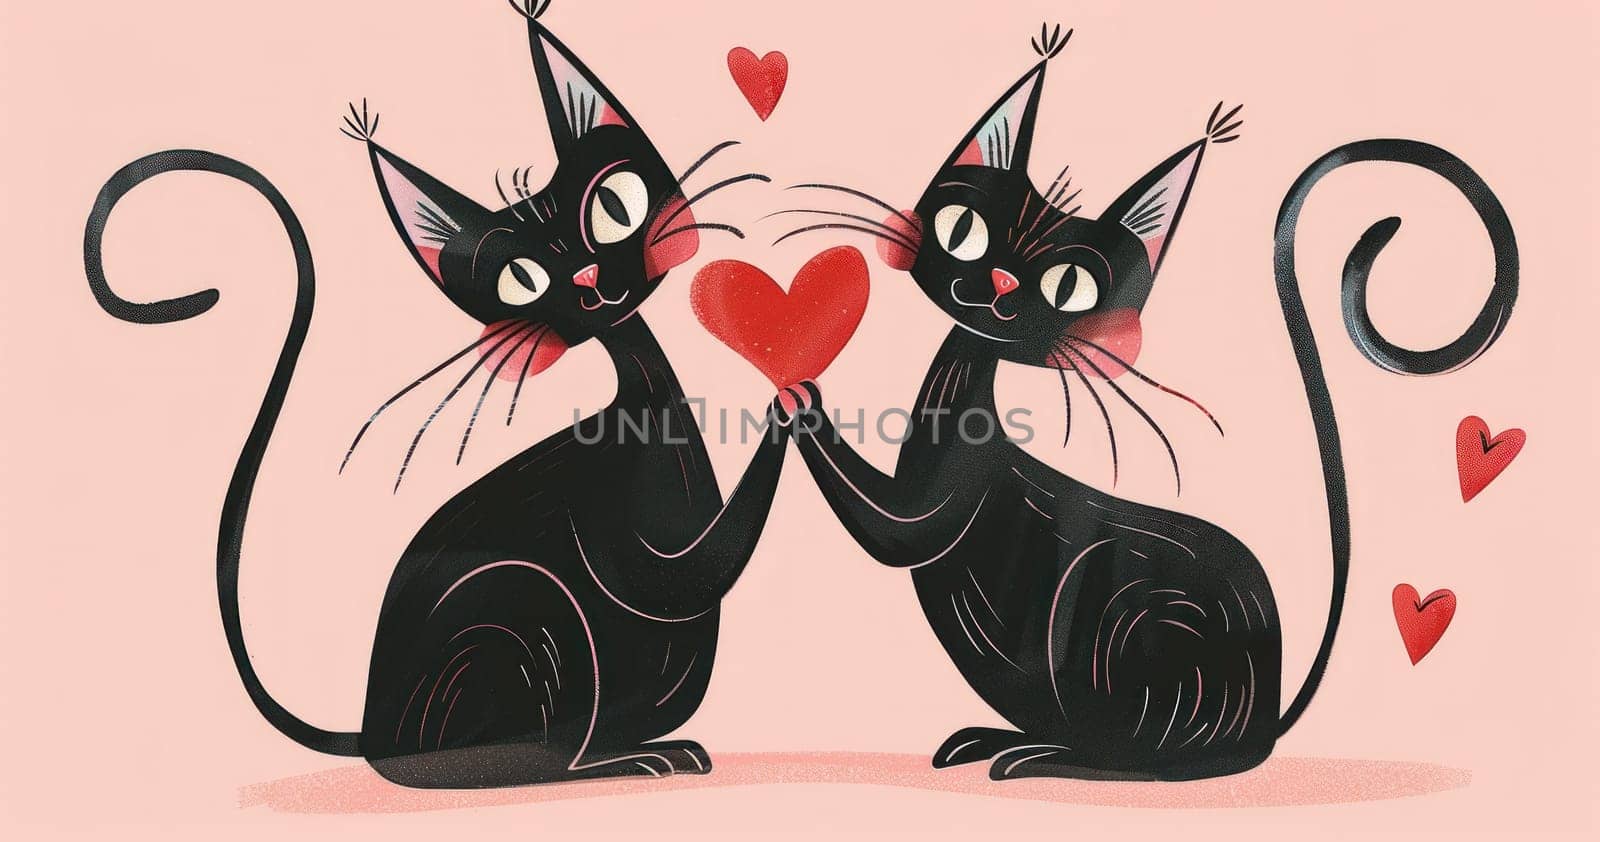 Romantic valentine's day illustration featuring two black cats holding heart shaped object surrounded by hearts by Vichizh